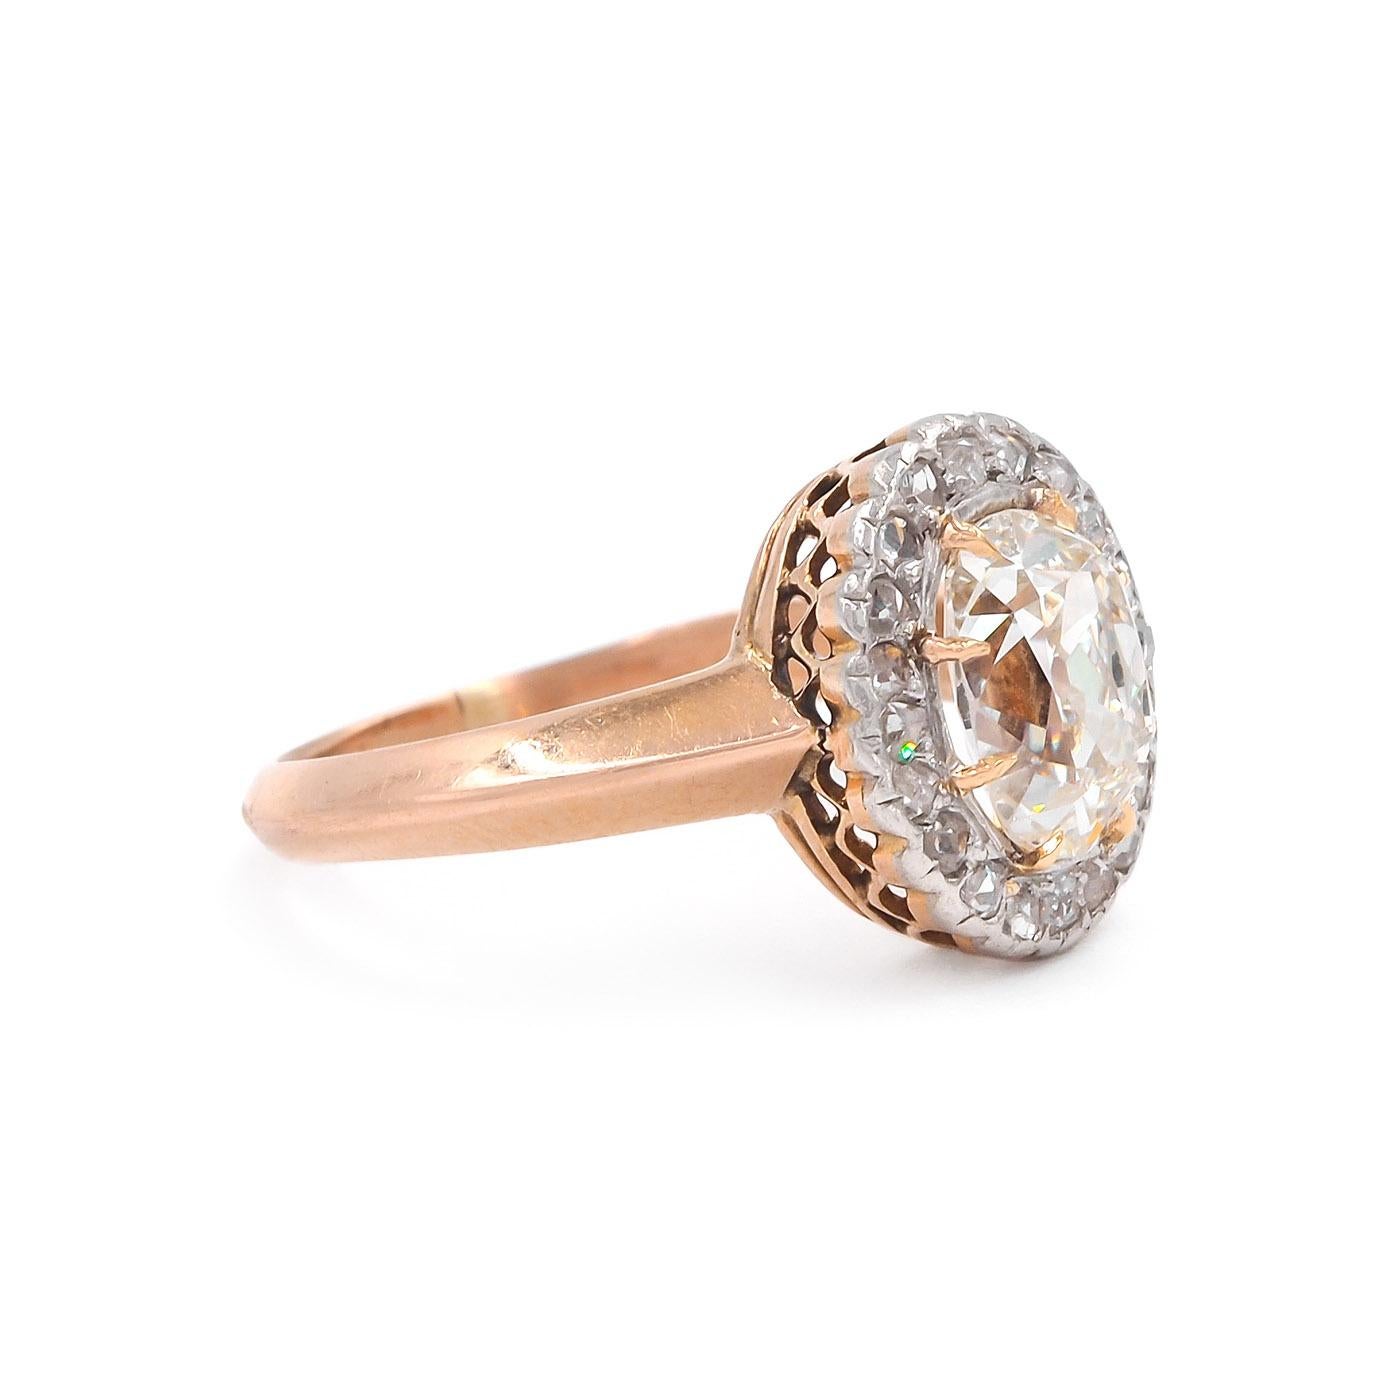 Edwardian era  Old Mine Cushion Cut Diamond Cluster Engagement Ring composed of 18k light rose gold and platinum. Featuring a 1.52 Carat elongated Old Mine Cut diamond, GIA certified K color & VS2 clarity. The center diamond is surrounded by 20 Rose